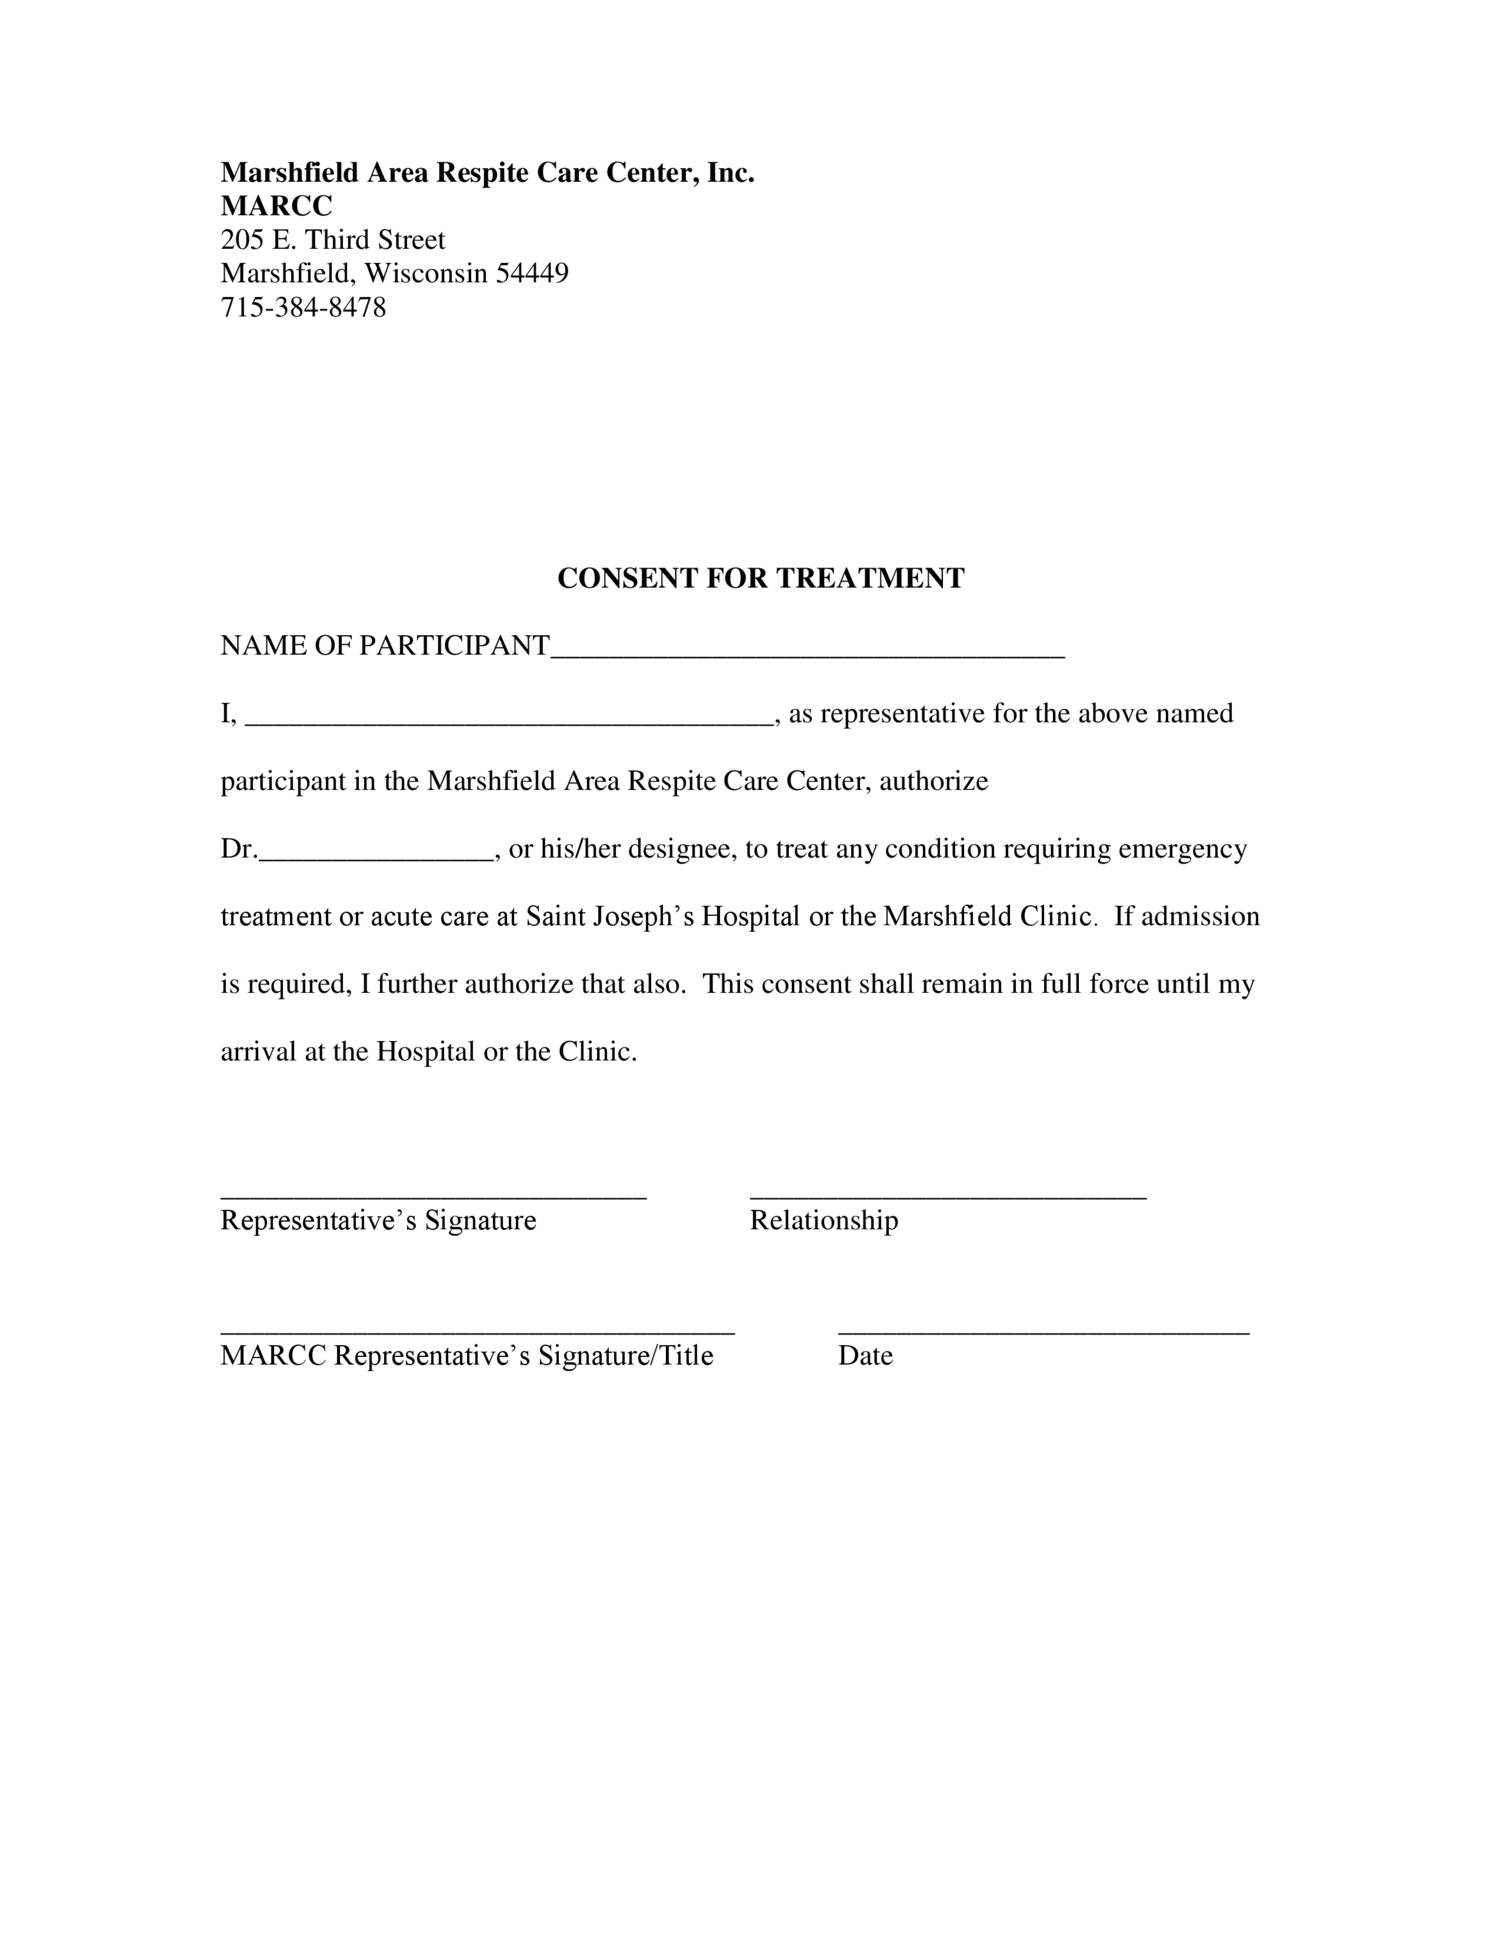 3 Consent For Treatment Form 11 04 Pdf Docdroid